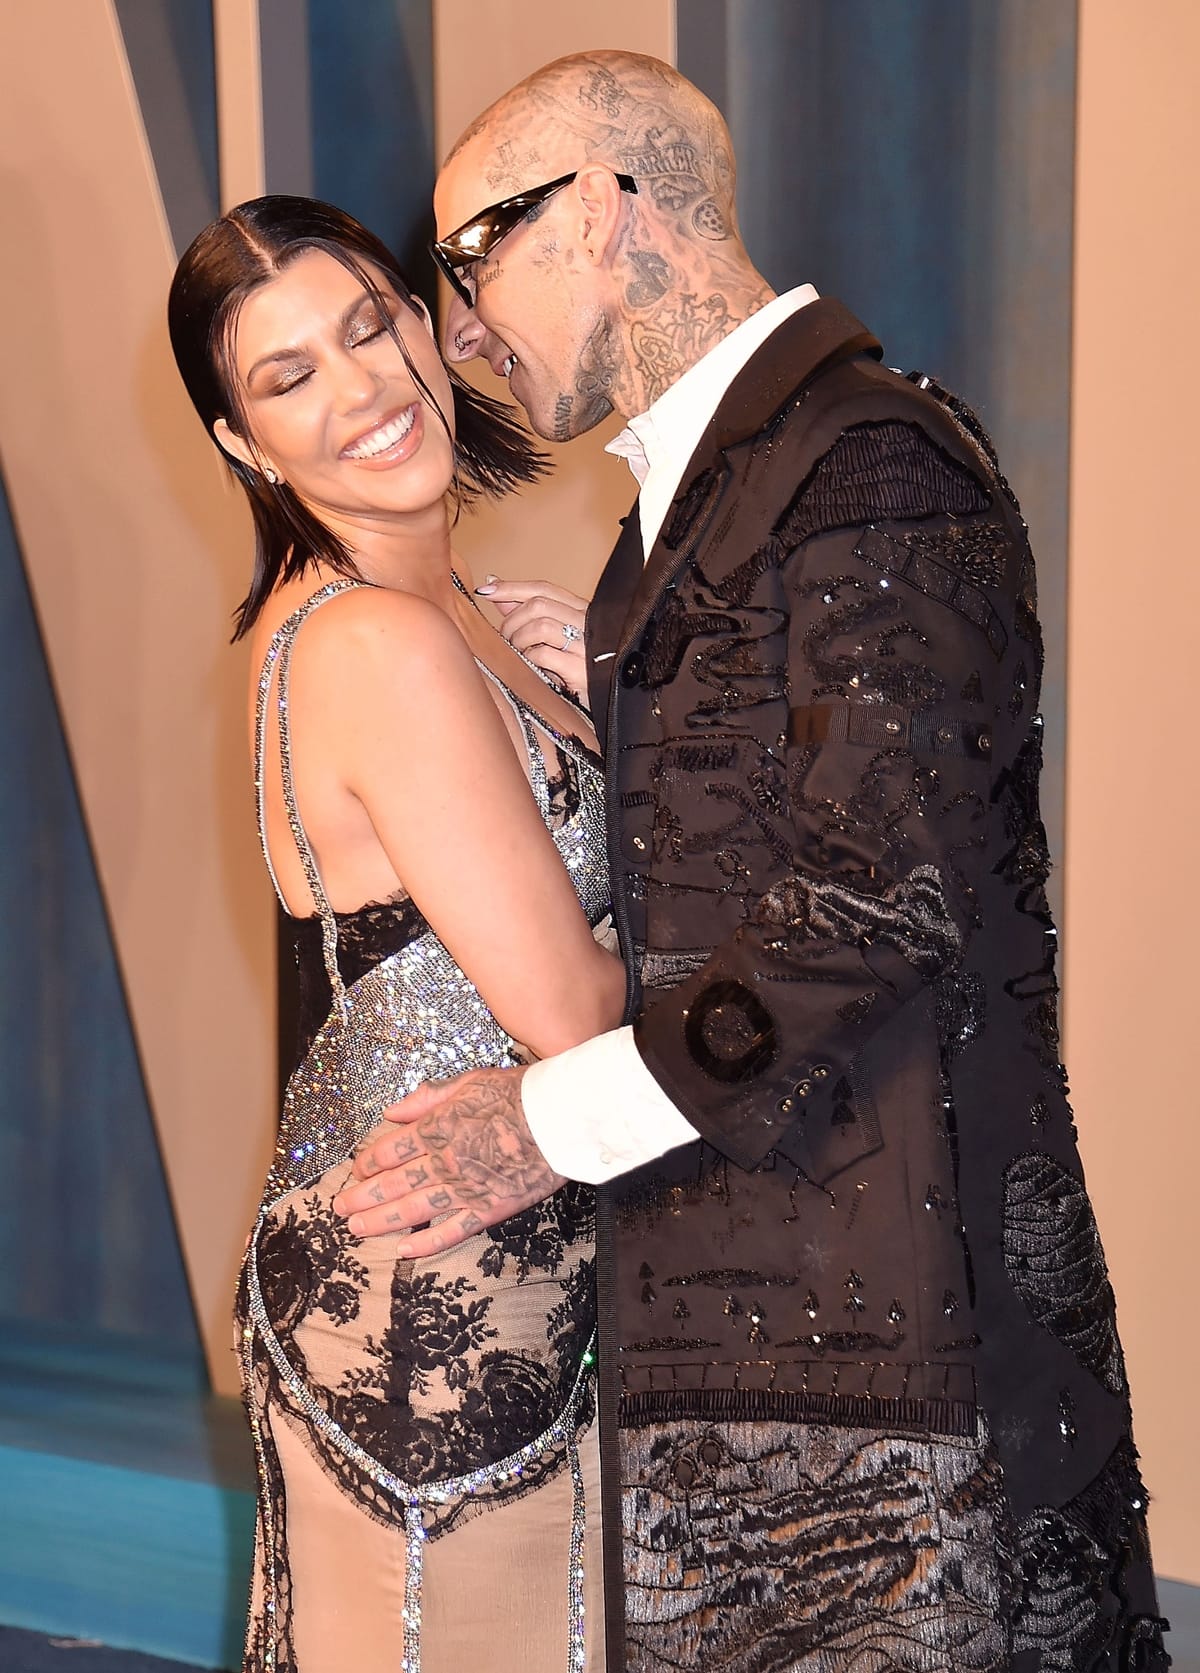 Kourtney Kardashian and Travis Barker are officially husband and wife after marrying in Las Vegas